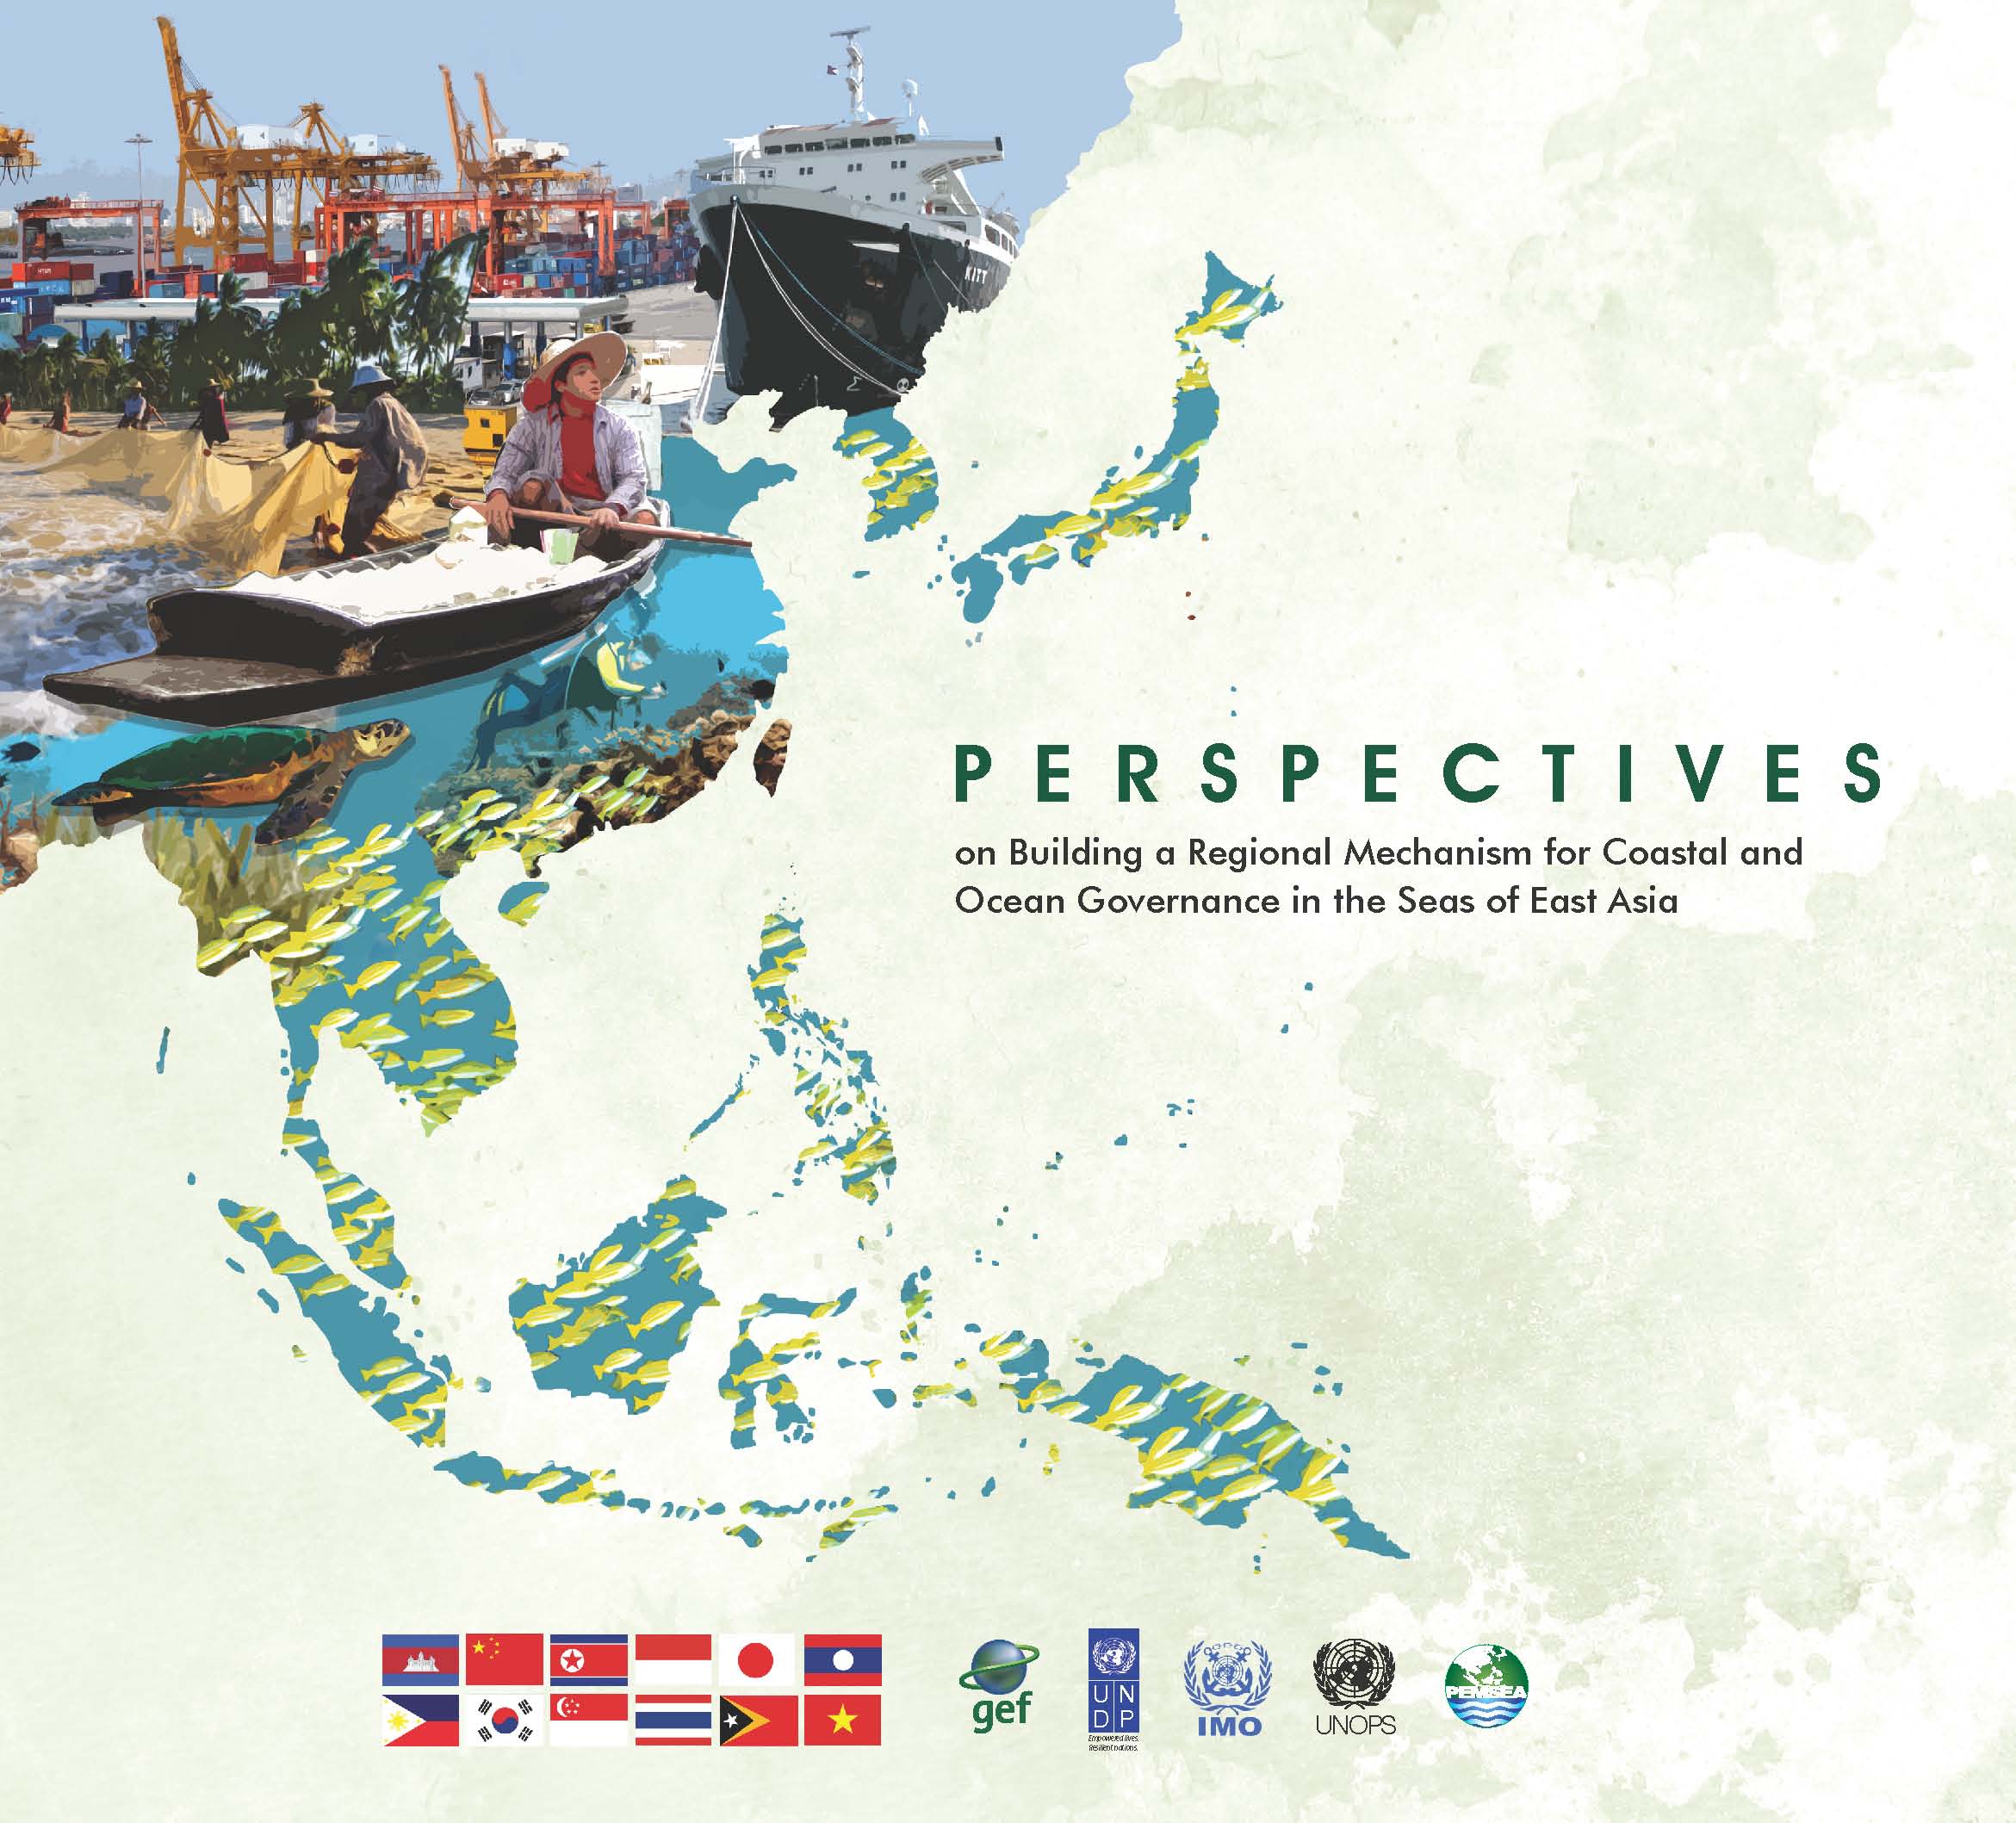 Perspectives on Building a Regional Mechanism for Coastal and Ocean Governance in the Seas of East Asia